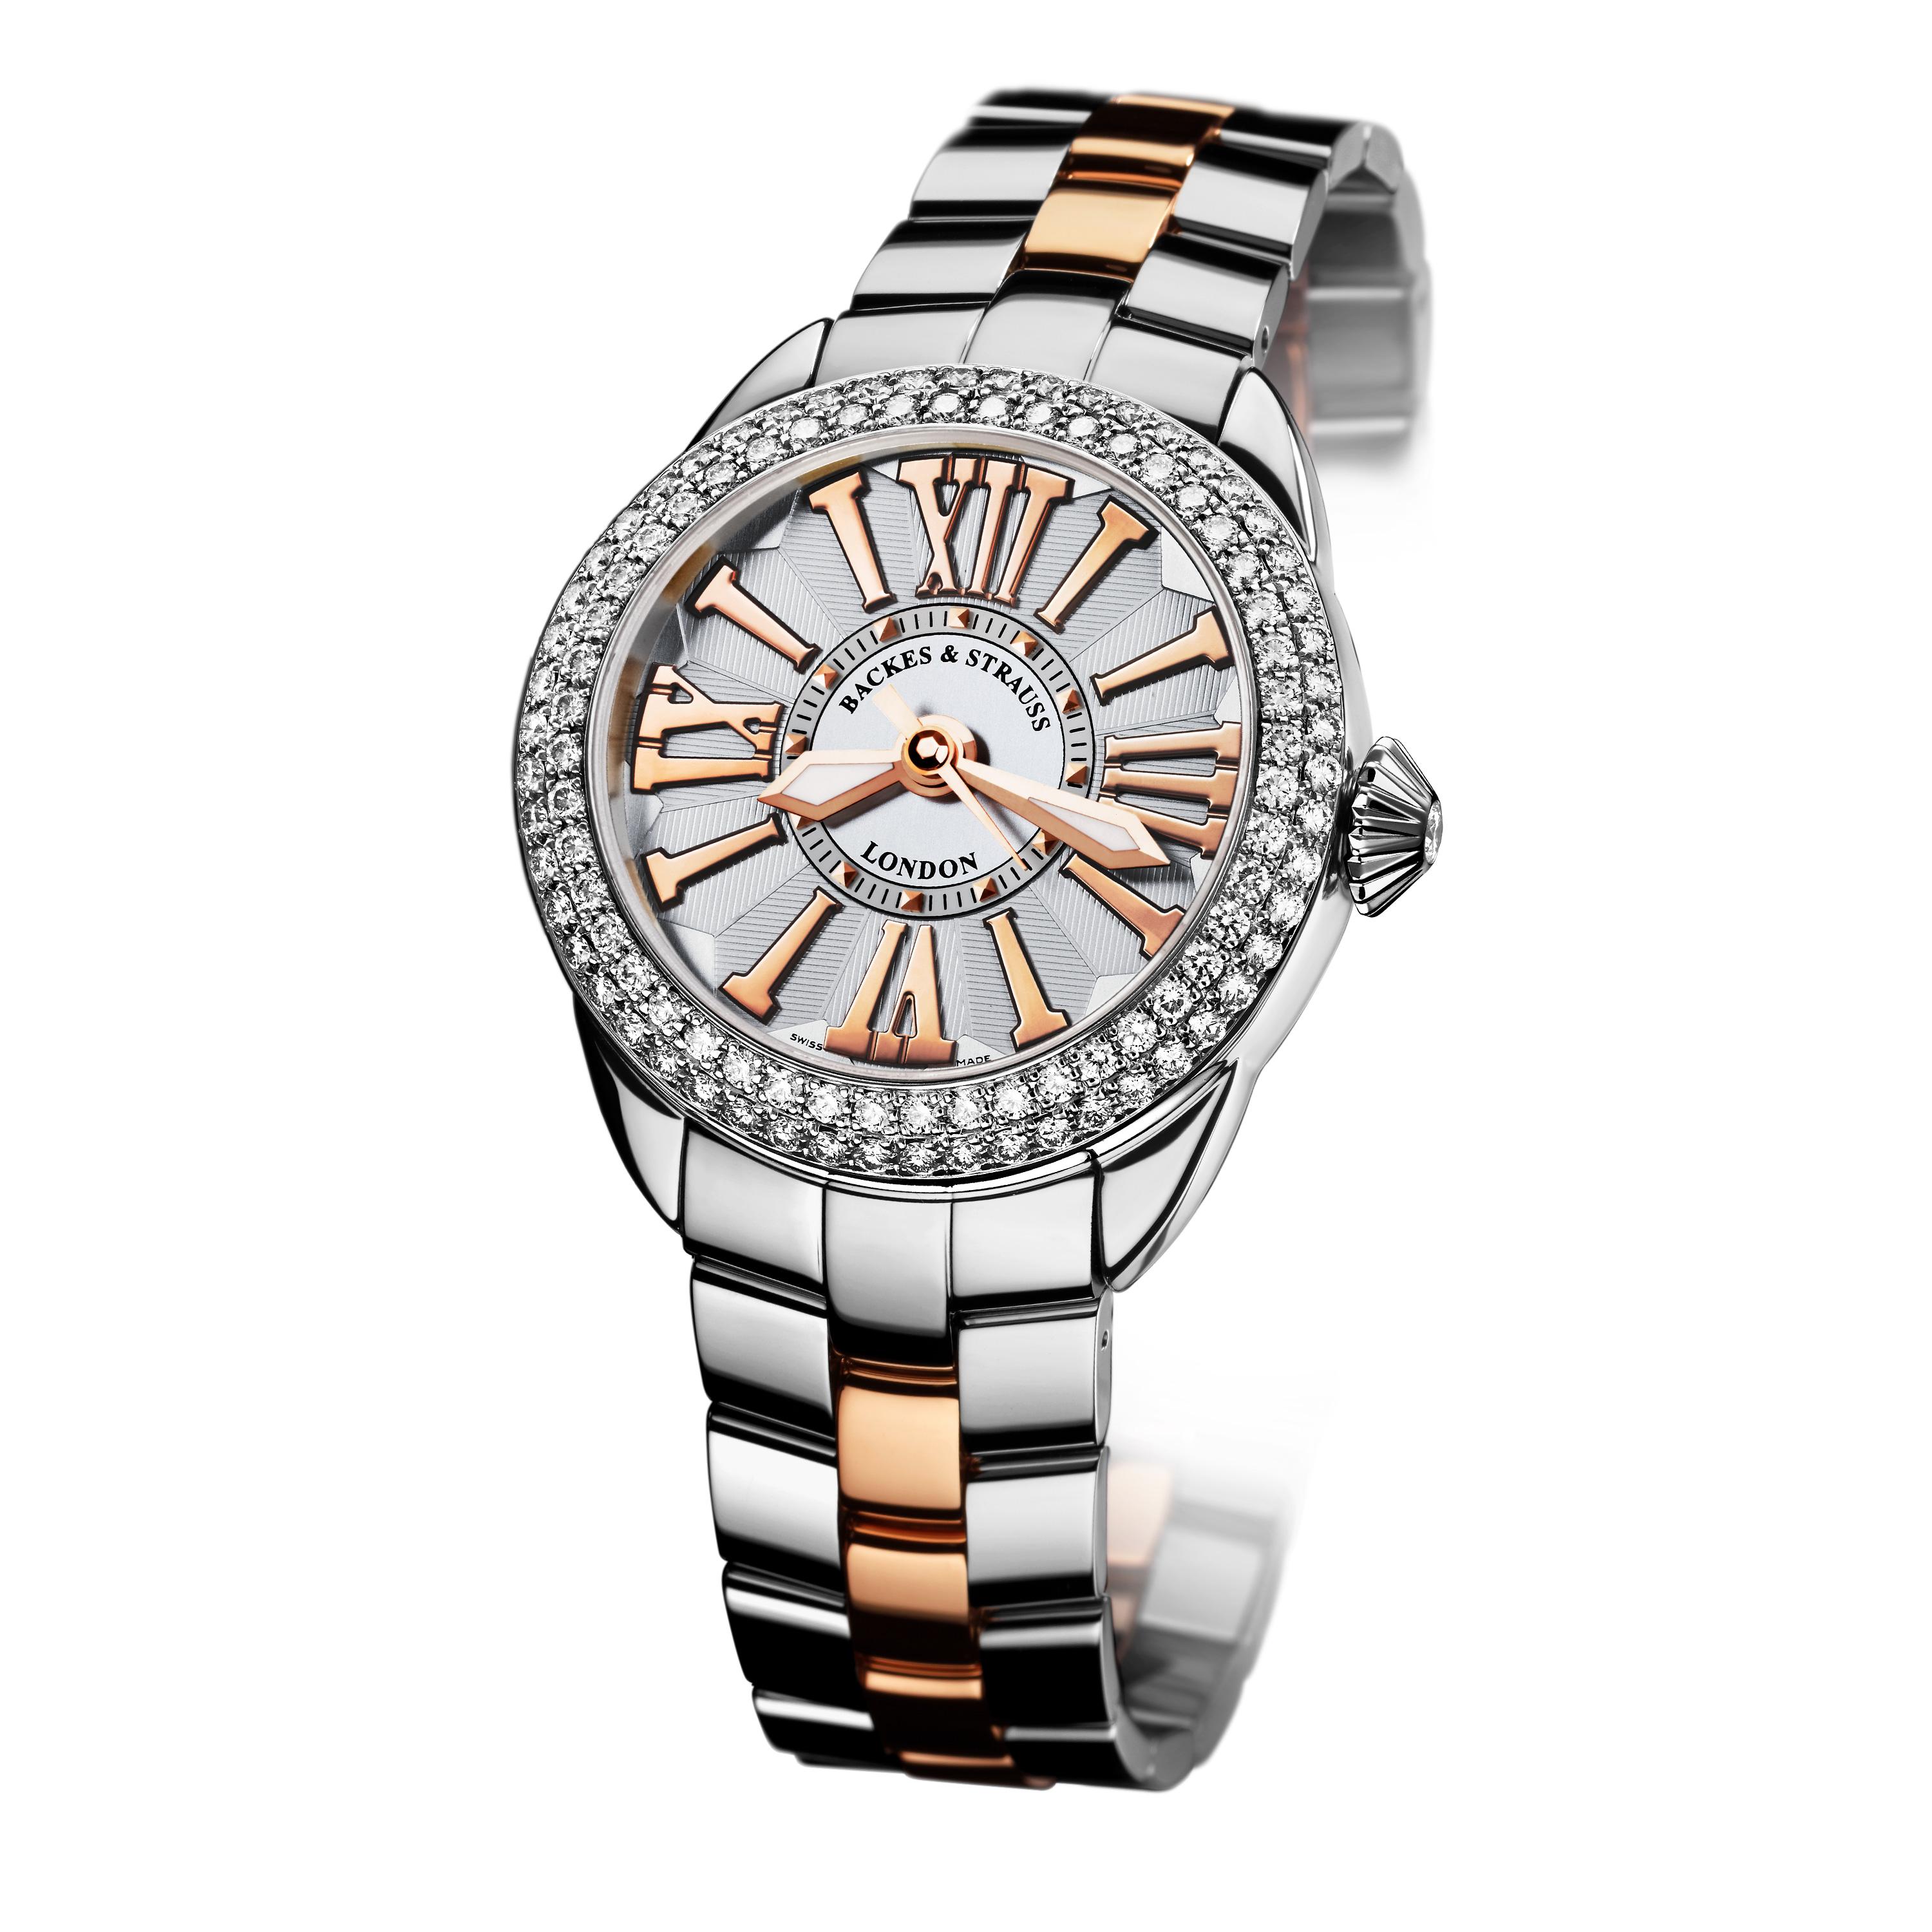 Piccadilly Steel 37 SP is a luxury diamond watch for women crafted in Stainless Steel, featuring a white round oval dial with rose gold Roman numerals, automatic movement. The case and crown are set with white Ideal Cut diamonds. It is a 37 mm